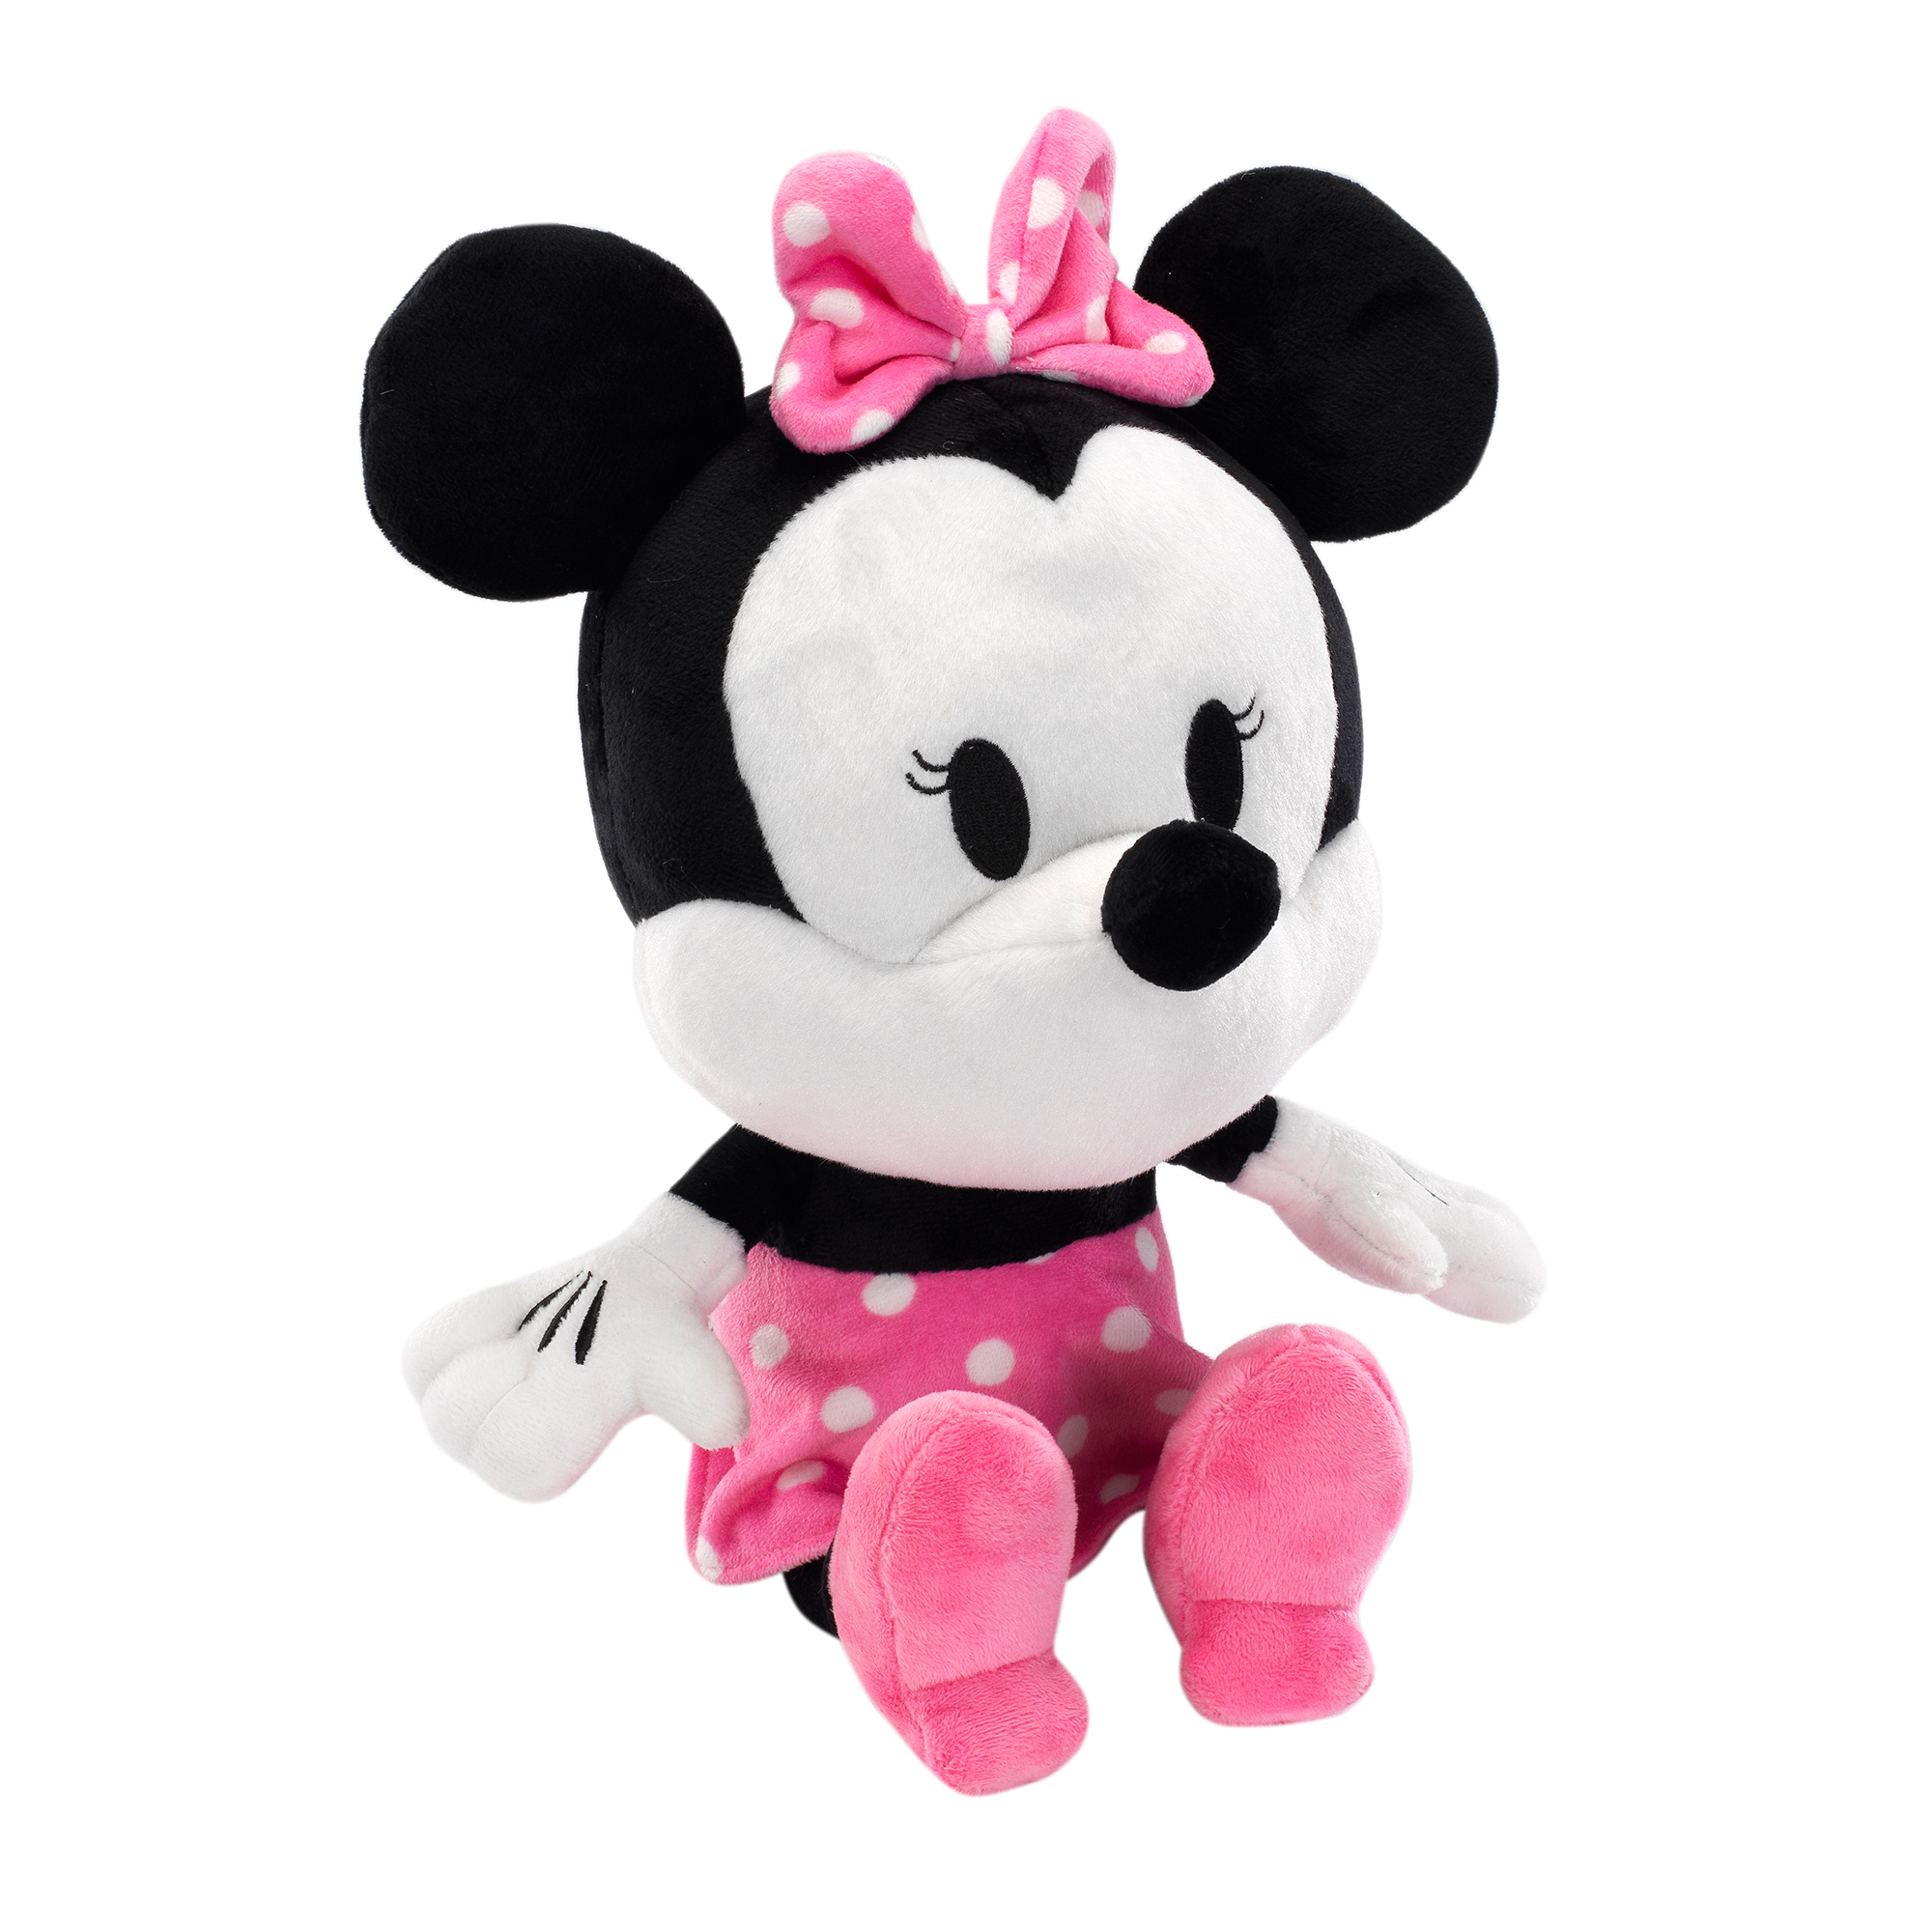 Disney Baby Minnie Mouse Plush Stuffed Animal Toy by Lambs & Ivy - image 1 of 4